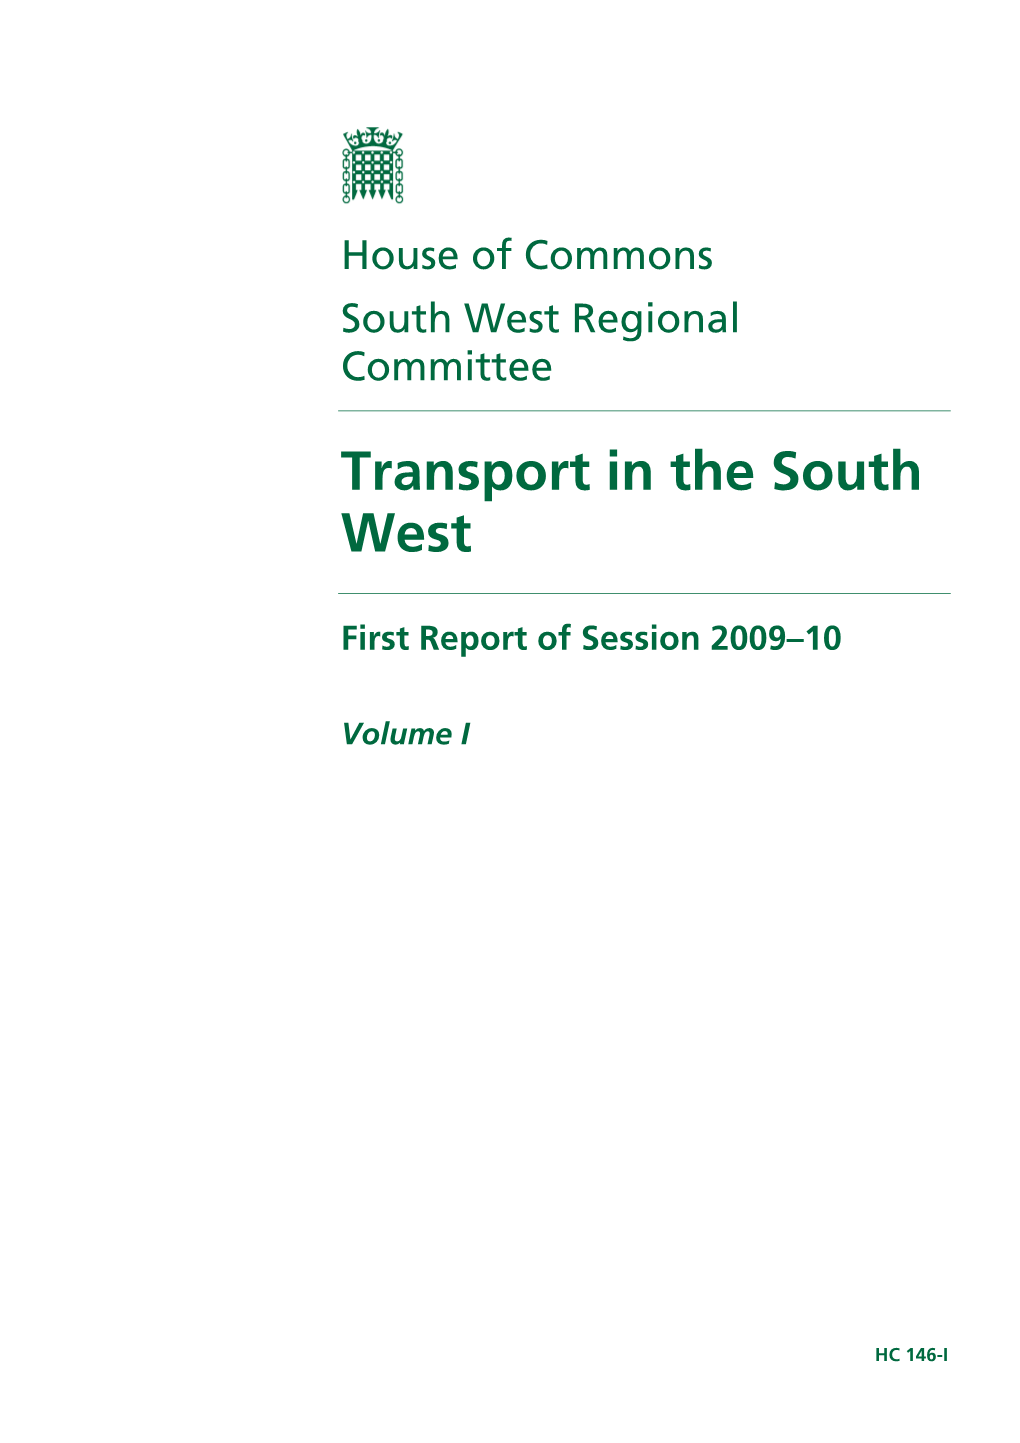 Transport in the South West